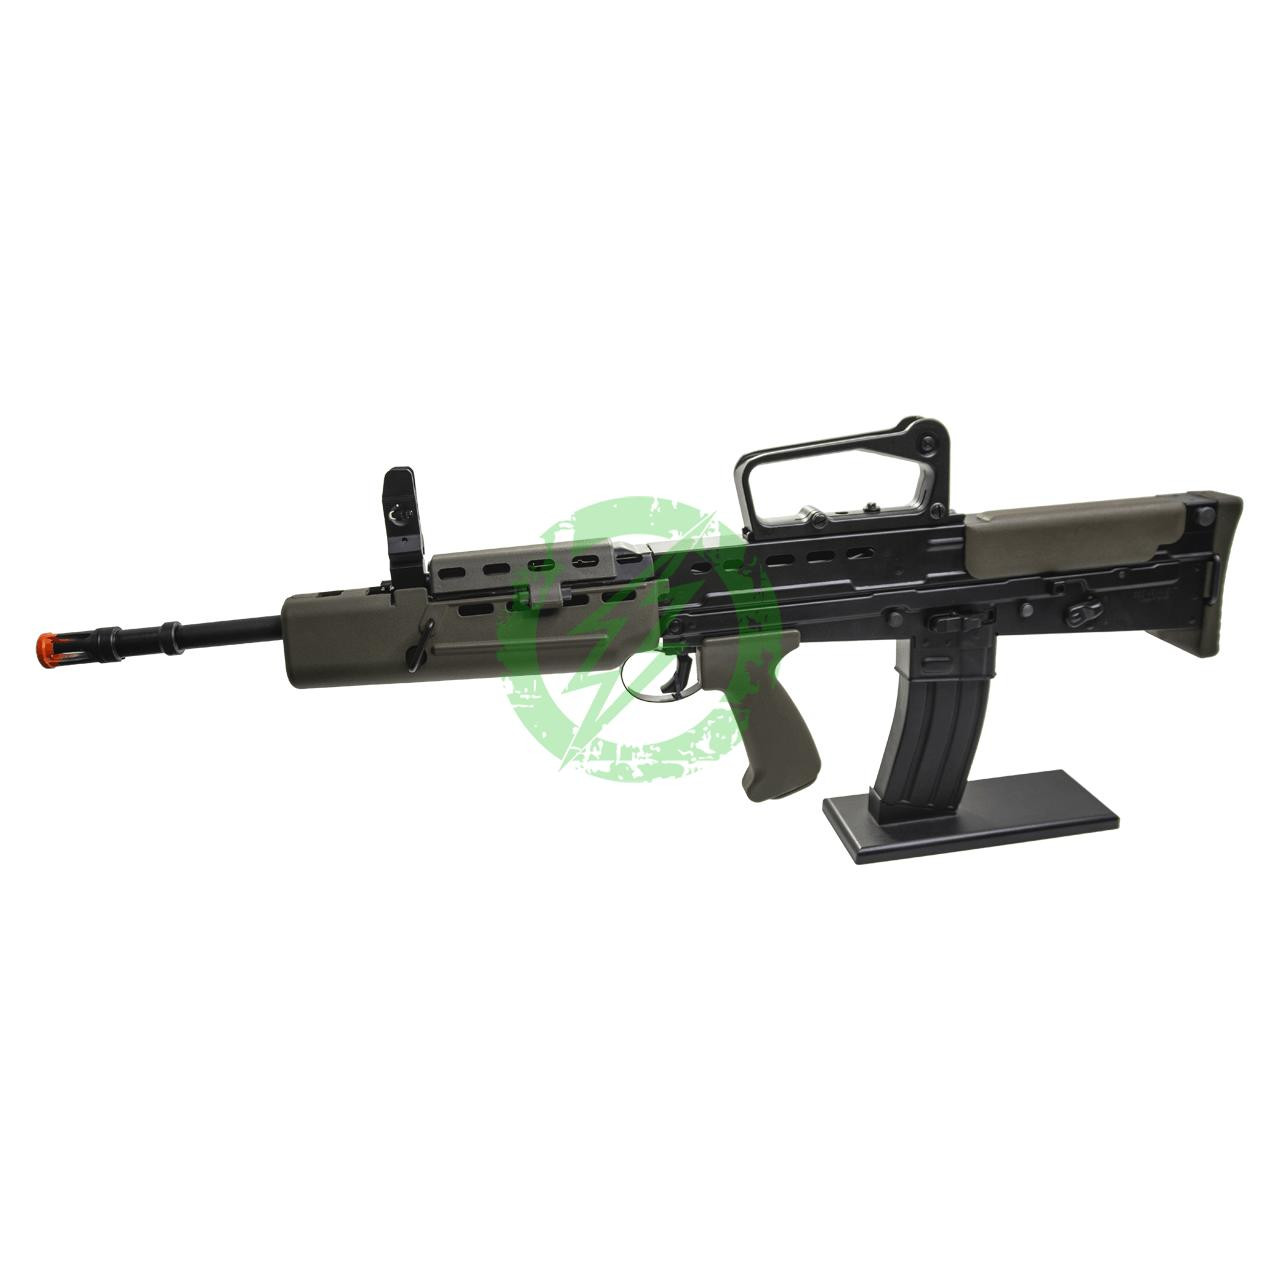  G&G L85 A1 Bullpup |  Electronic Trigger Unit Airsoft Electric Blowback 